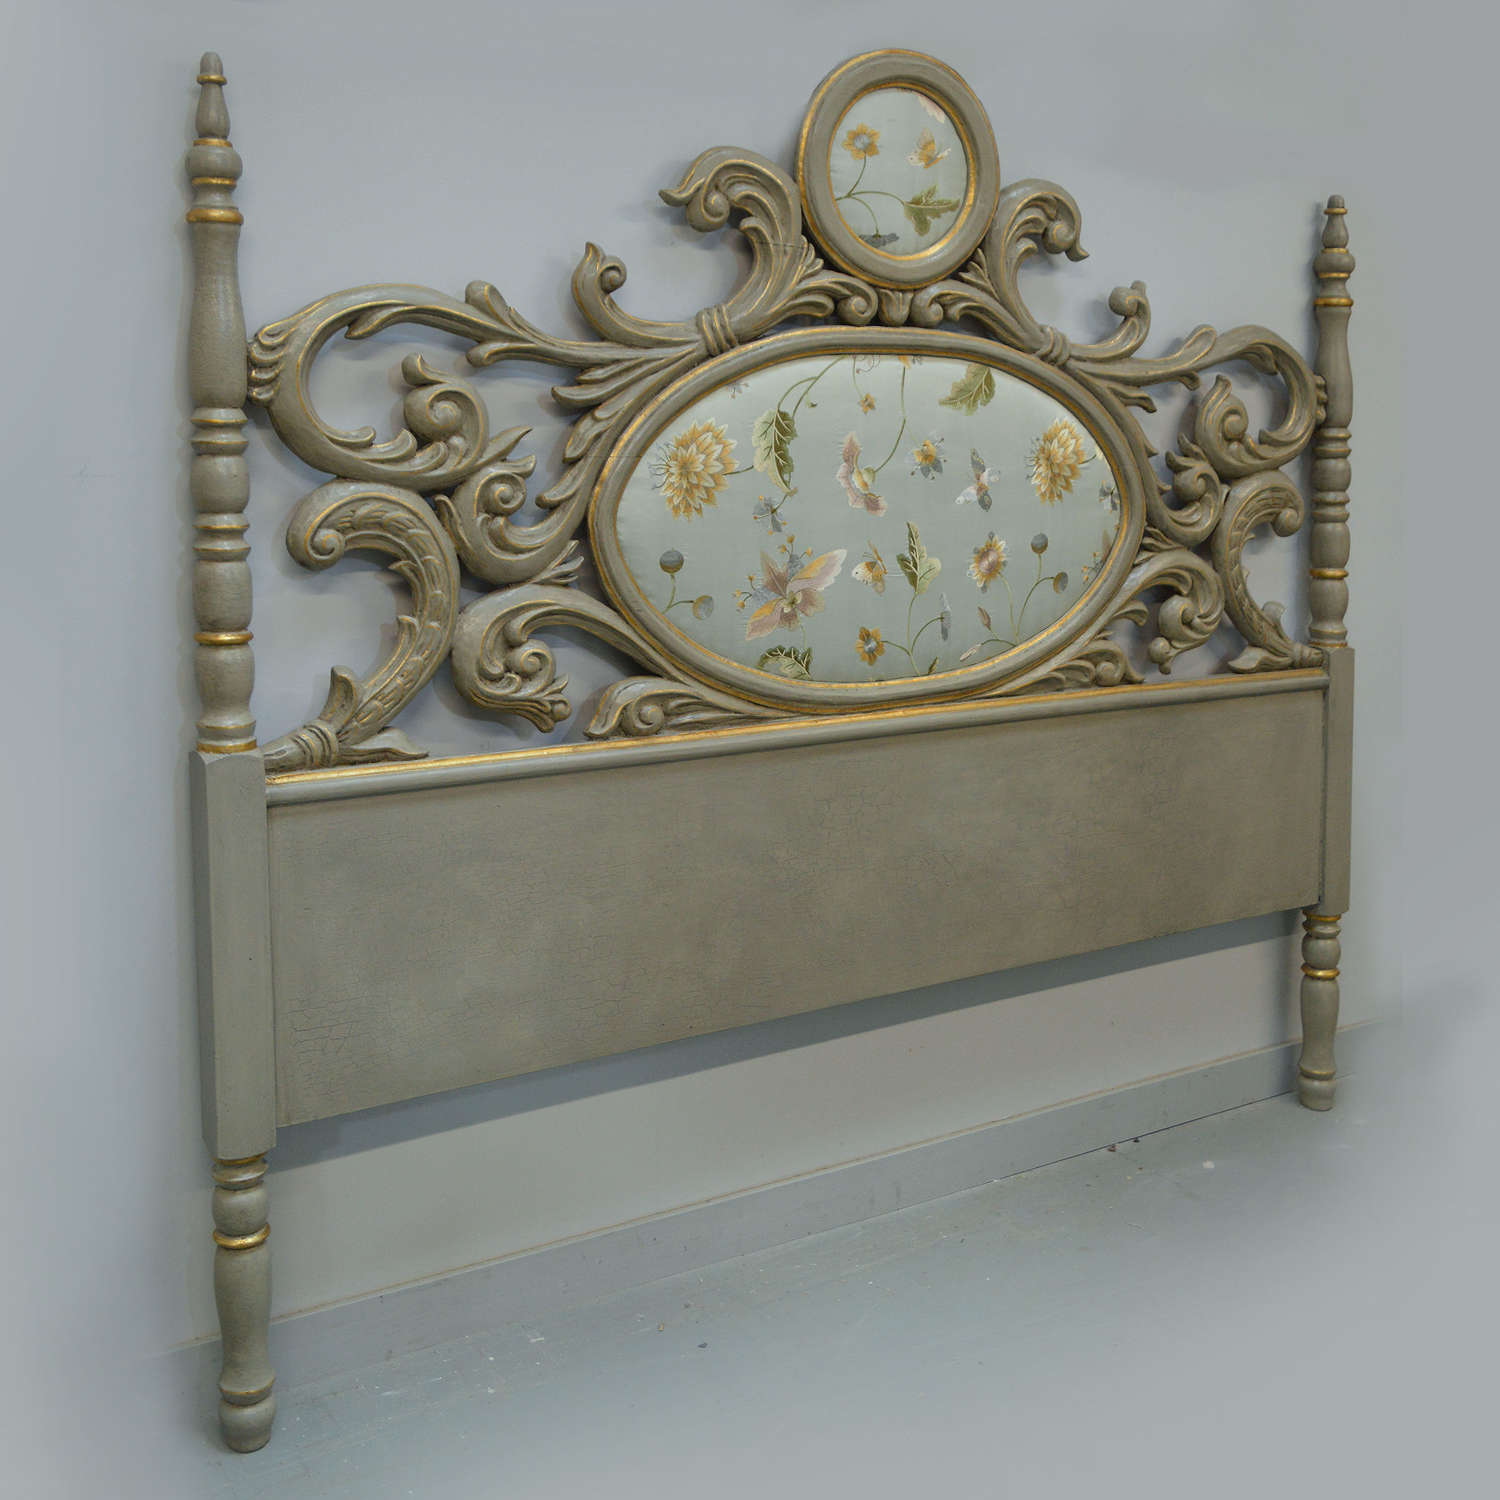 Large early 20th century Catalan carved wood headboard